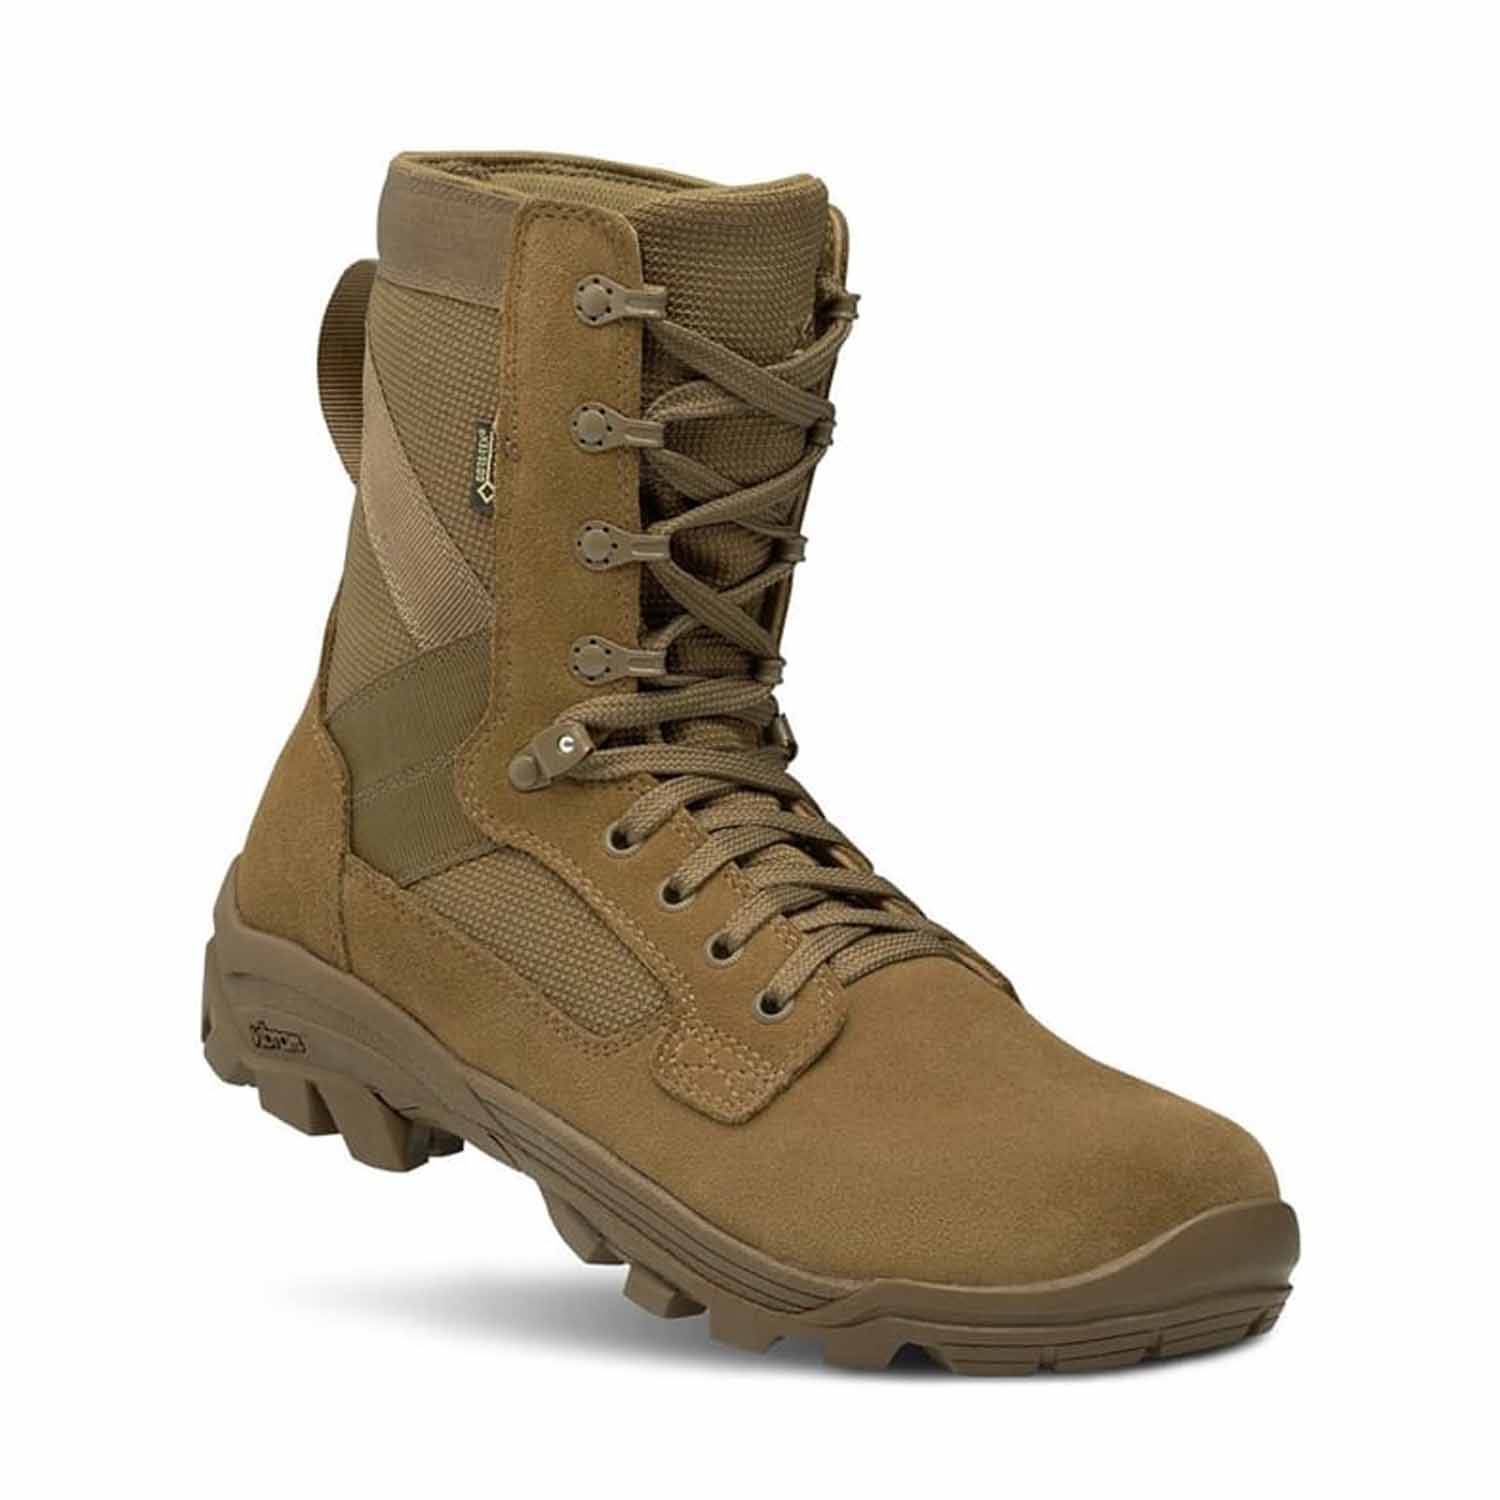 Garmont T8 Extreme GTX Tactical Boots with Ortholite Insoles